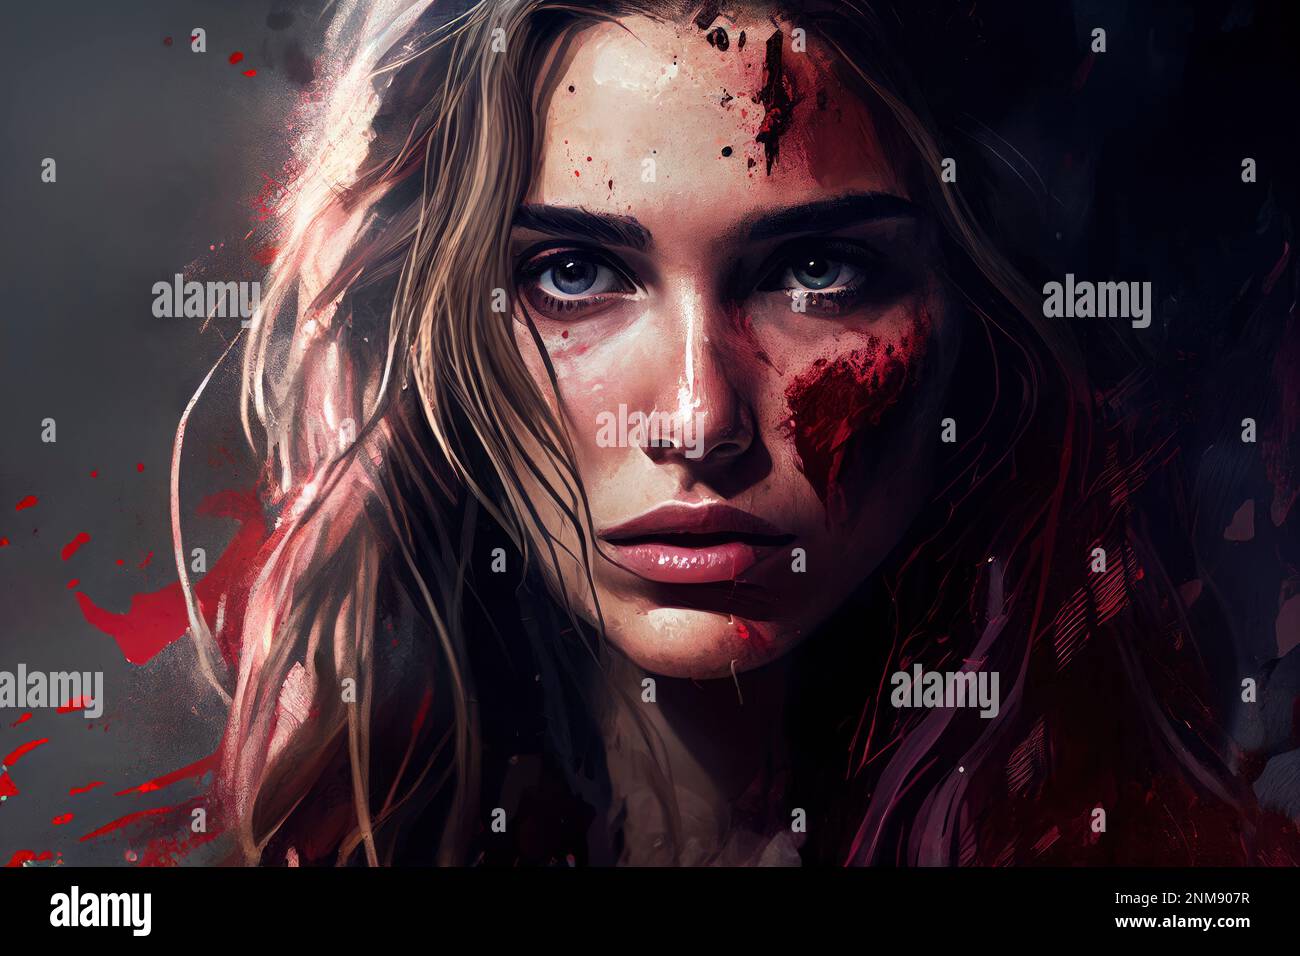 Woman With Bloody Facial Wounds Stock Photo - Alamy